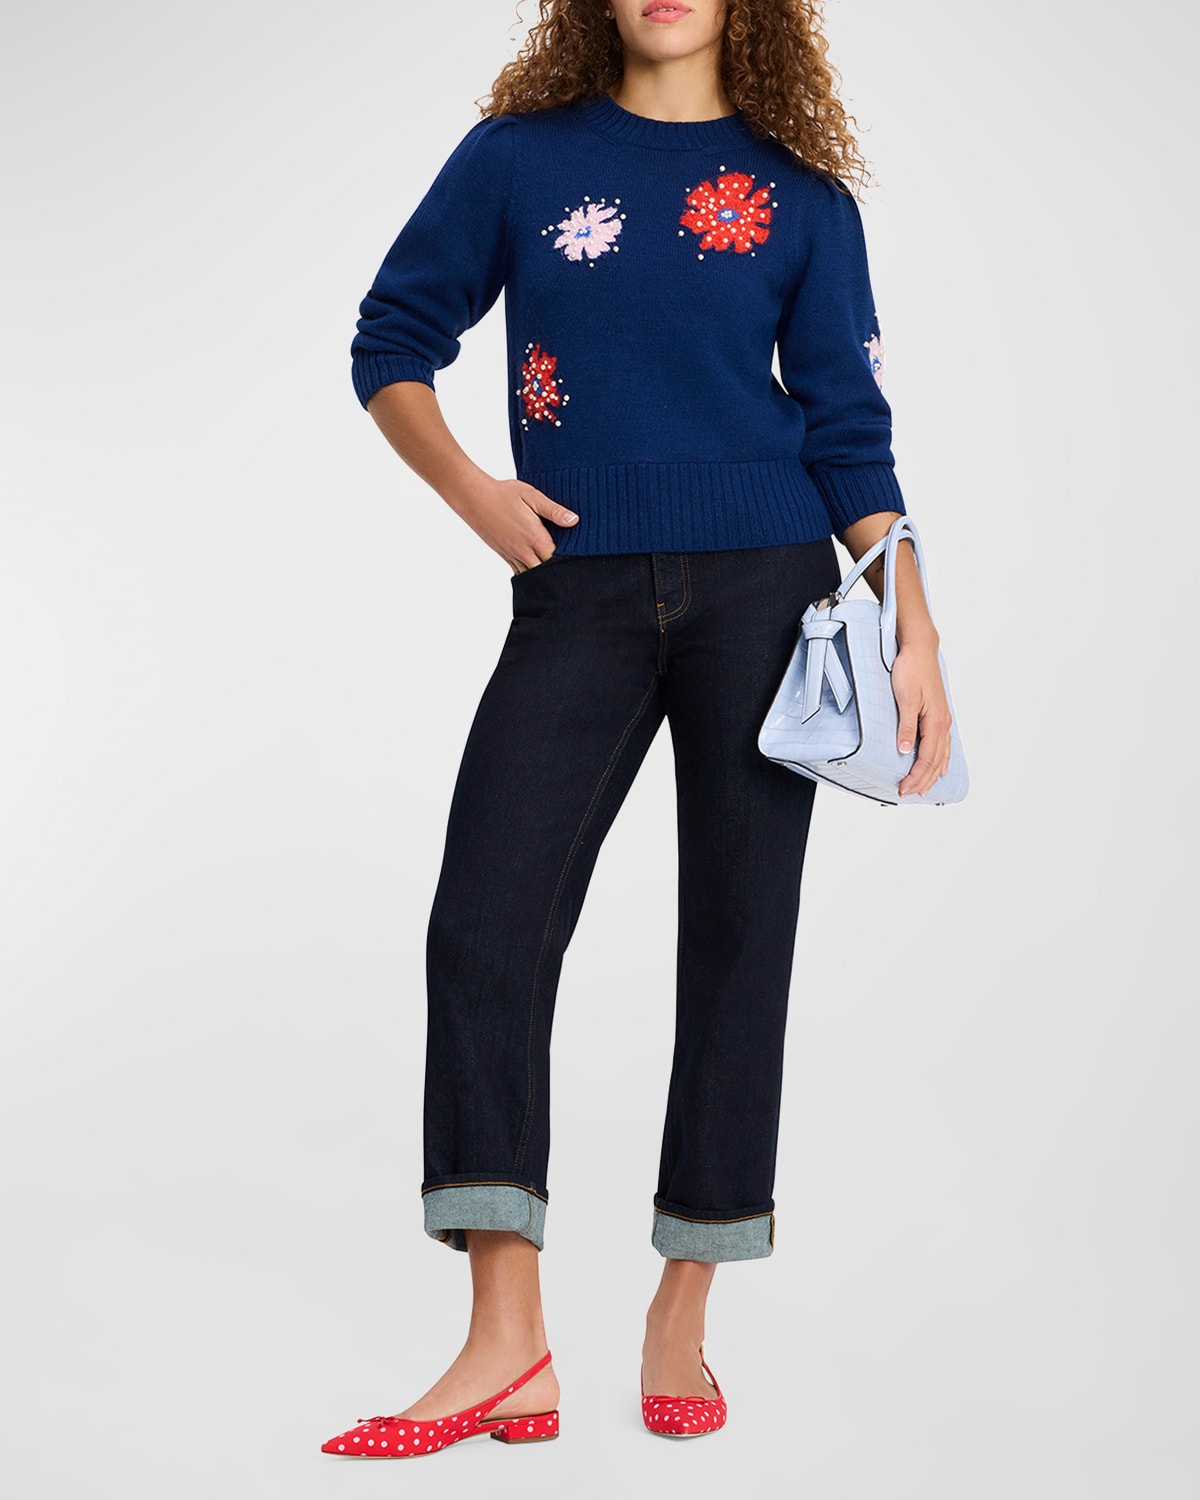 Kate Spade Beaded Floral Applique Wool Jumper In French Navy